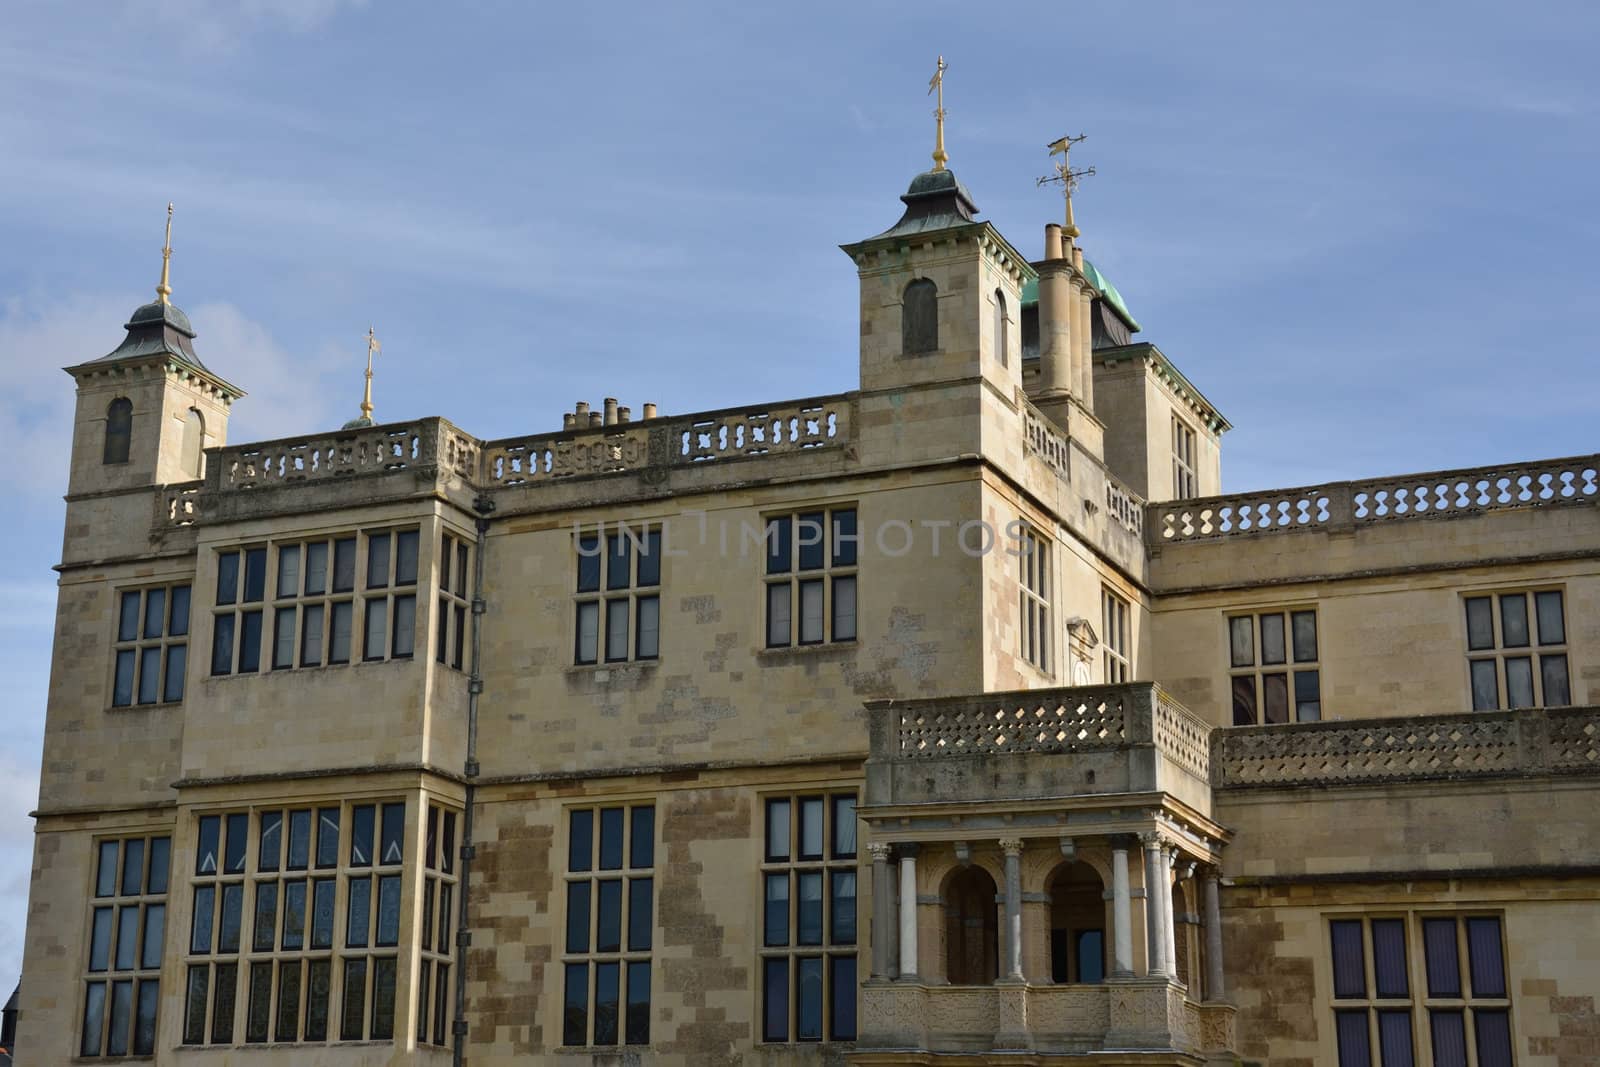 Audley end Stately home